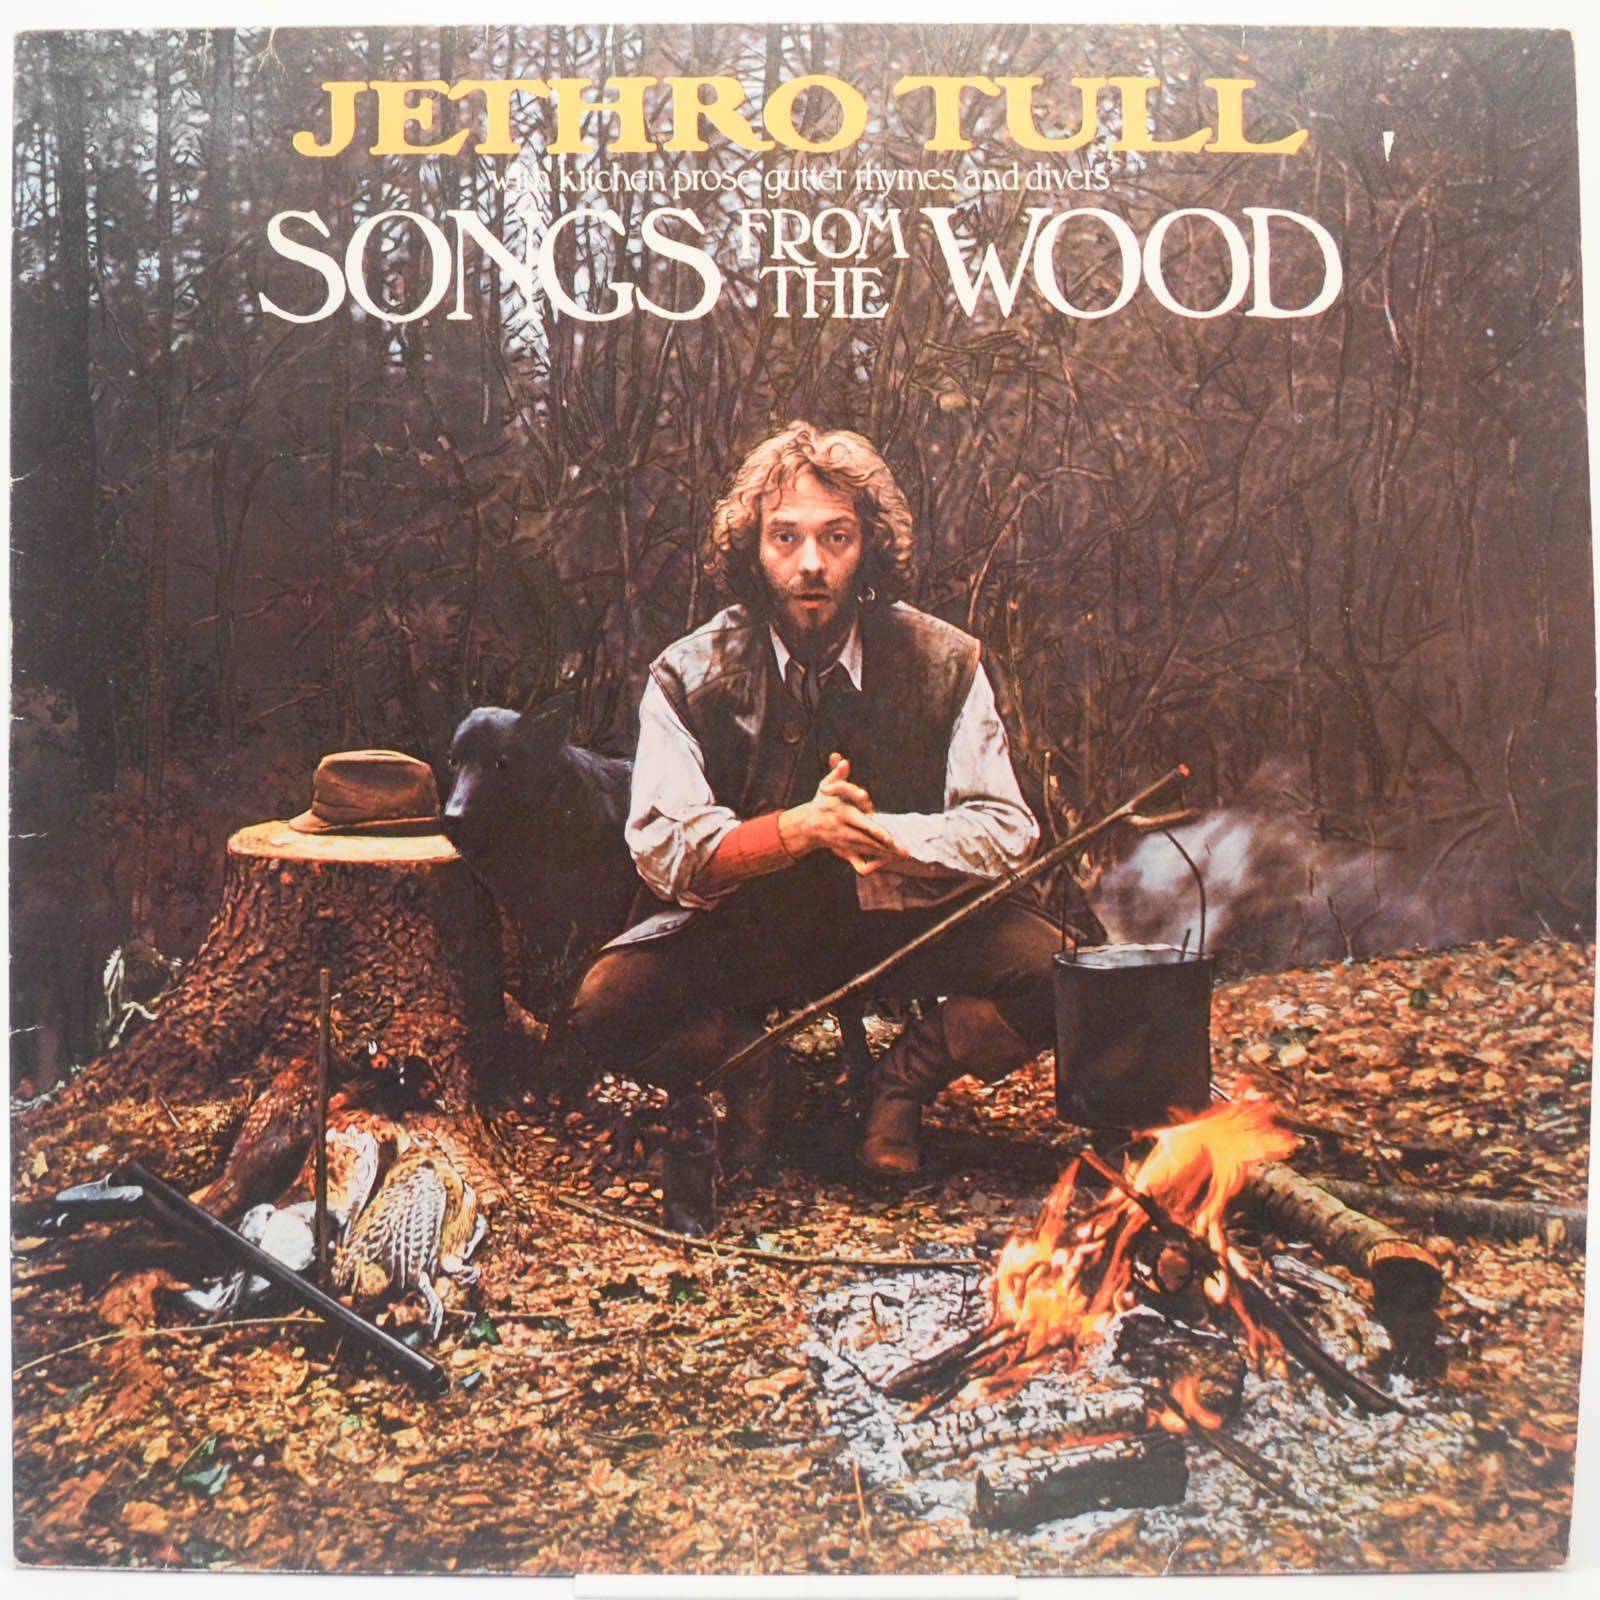 Jethro Tull — Songs From The Wood, 1977